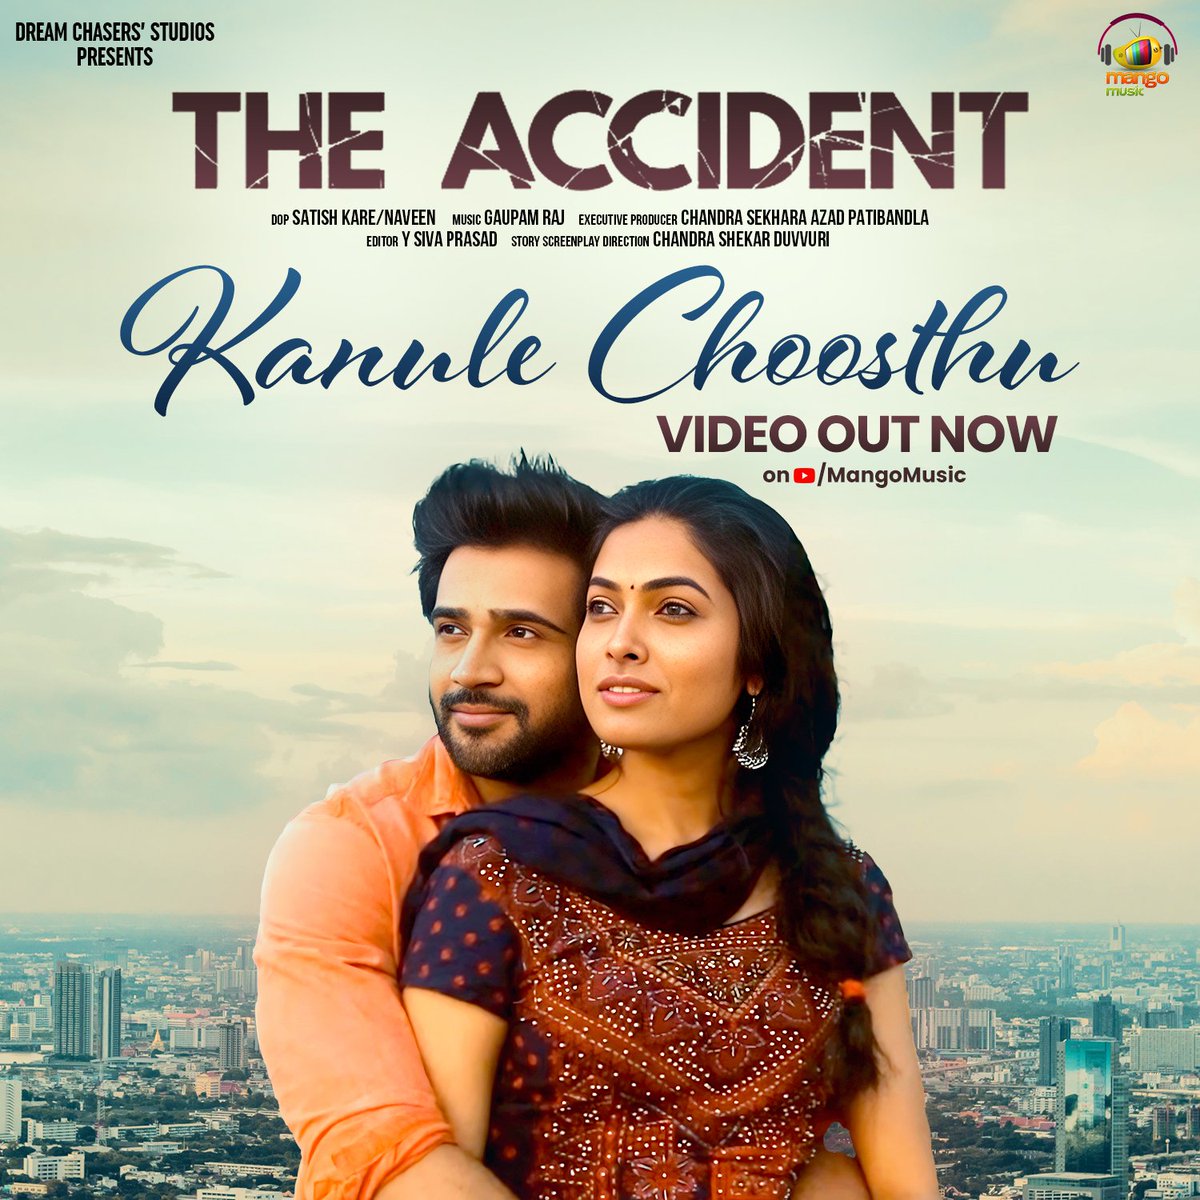 Experience the beauty of love through music with #KanuleChoosthu from #TheAccident movie. 🎶💑 

It's out now on @mangomusiclabel, don't miss out on this heartwarming melody💖🌟

🔗 youtu.be/PS3ekmHUiCw

🎤 Vocals - #sireeshabhagavatula #vocallyayaan

🖋️ Lyrics - #Anilkishore